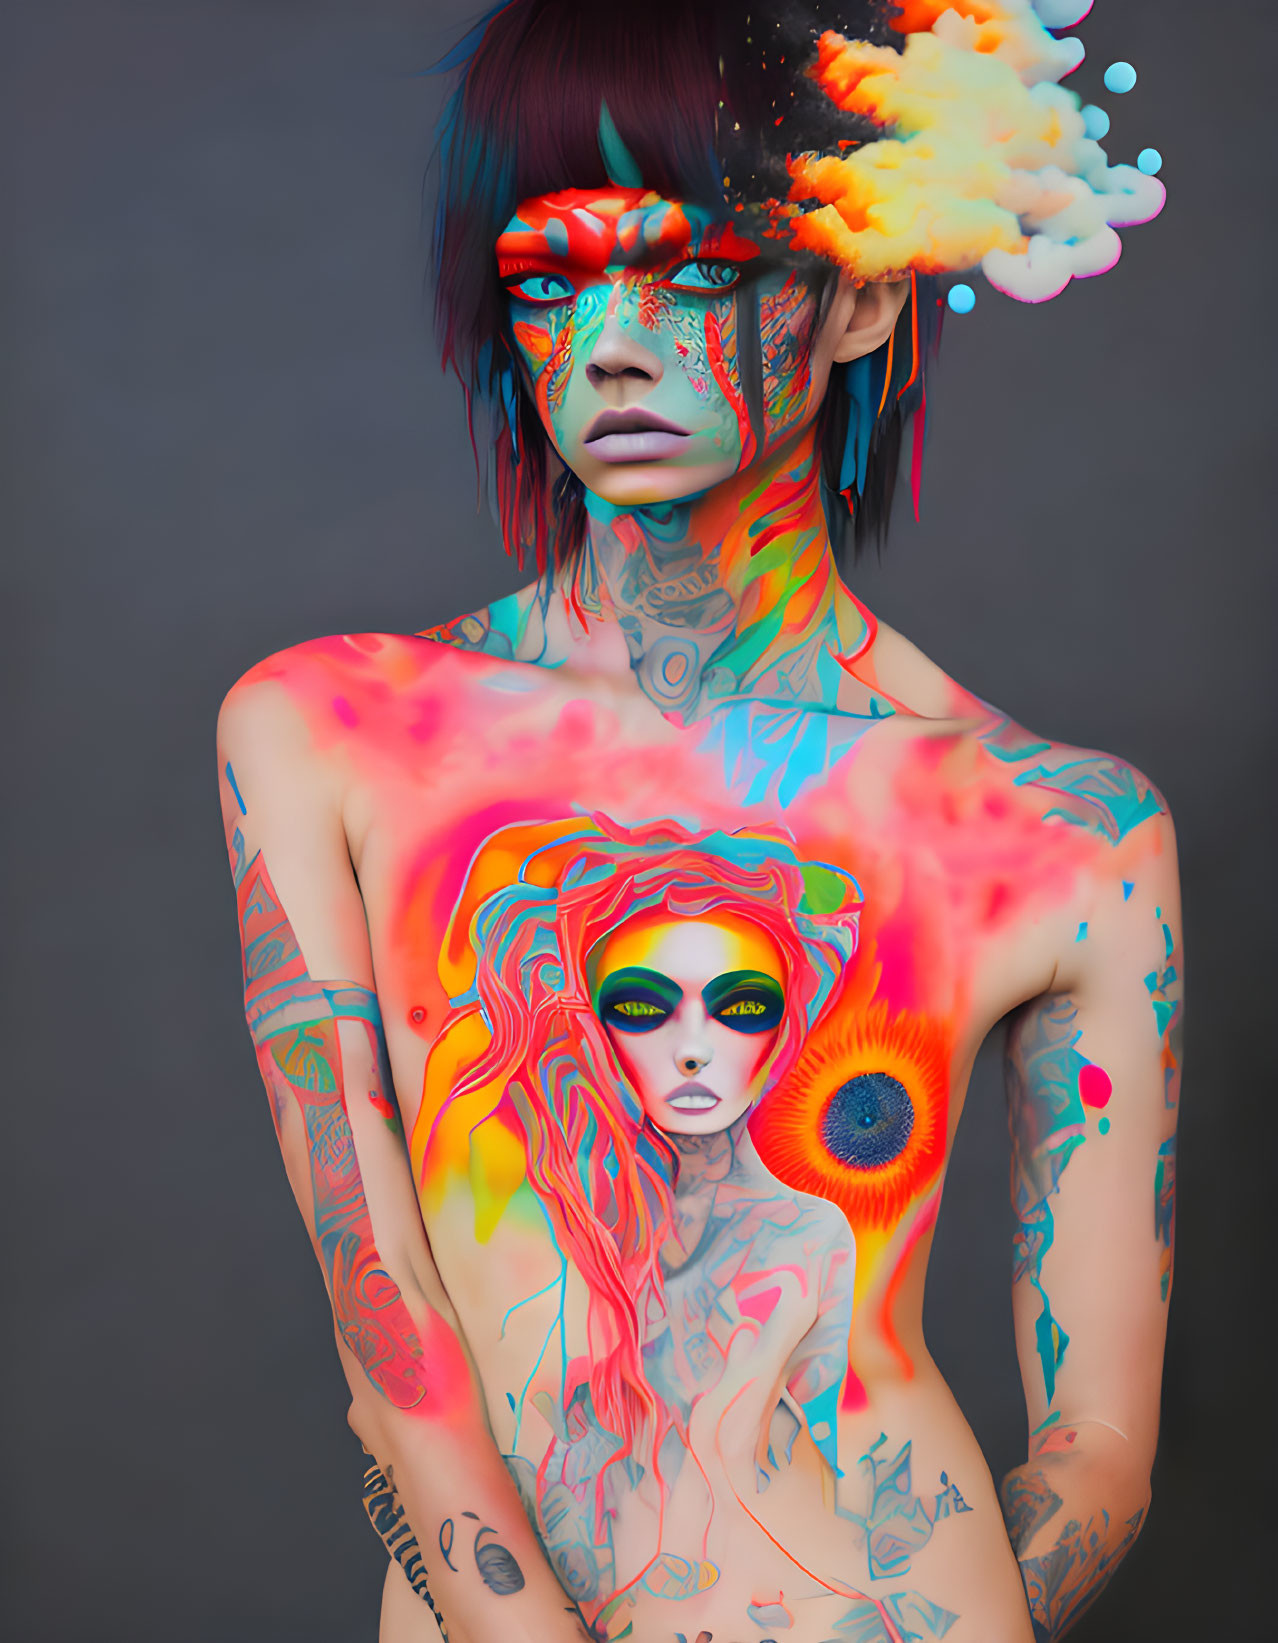 Colorful Body Art with Explosive Cloud Headpiece